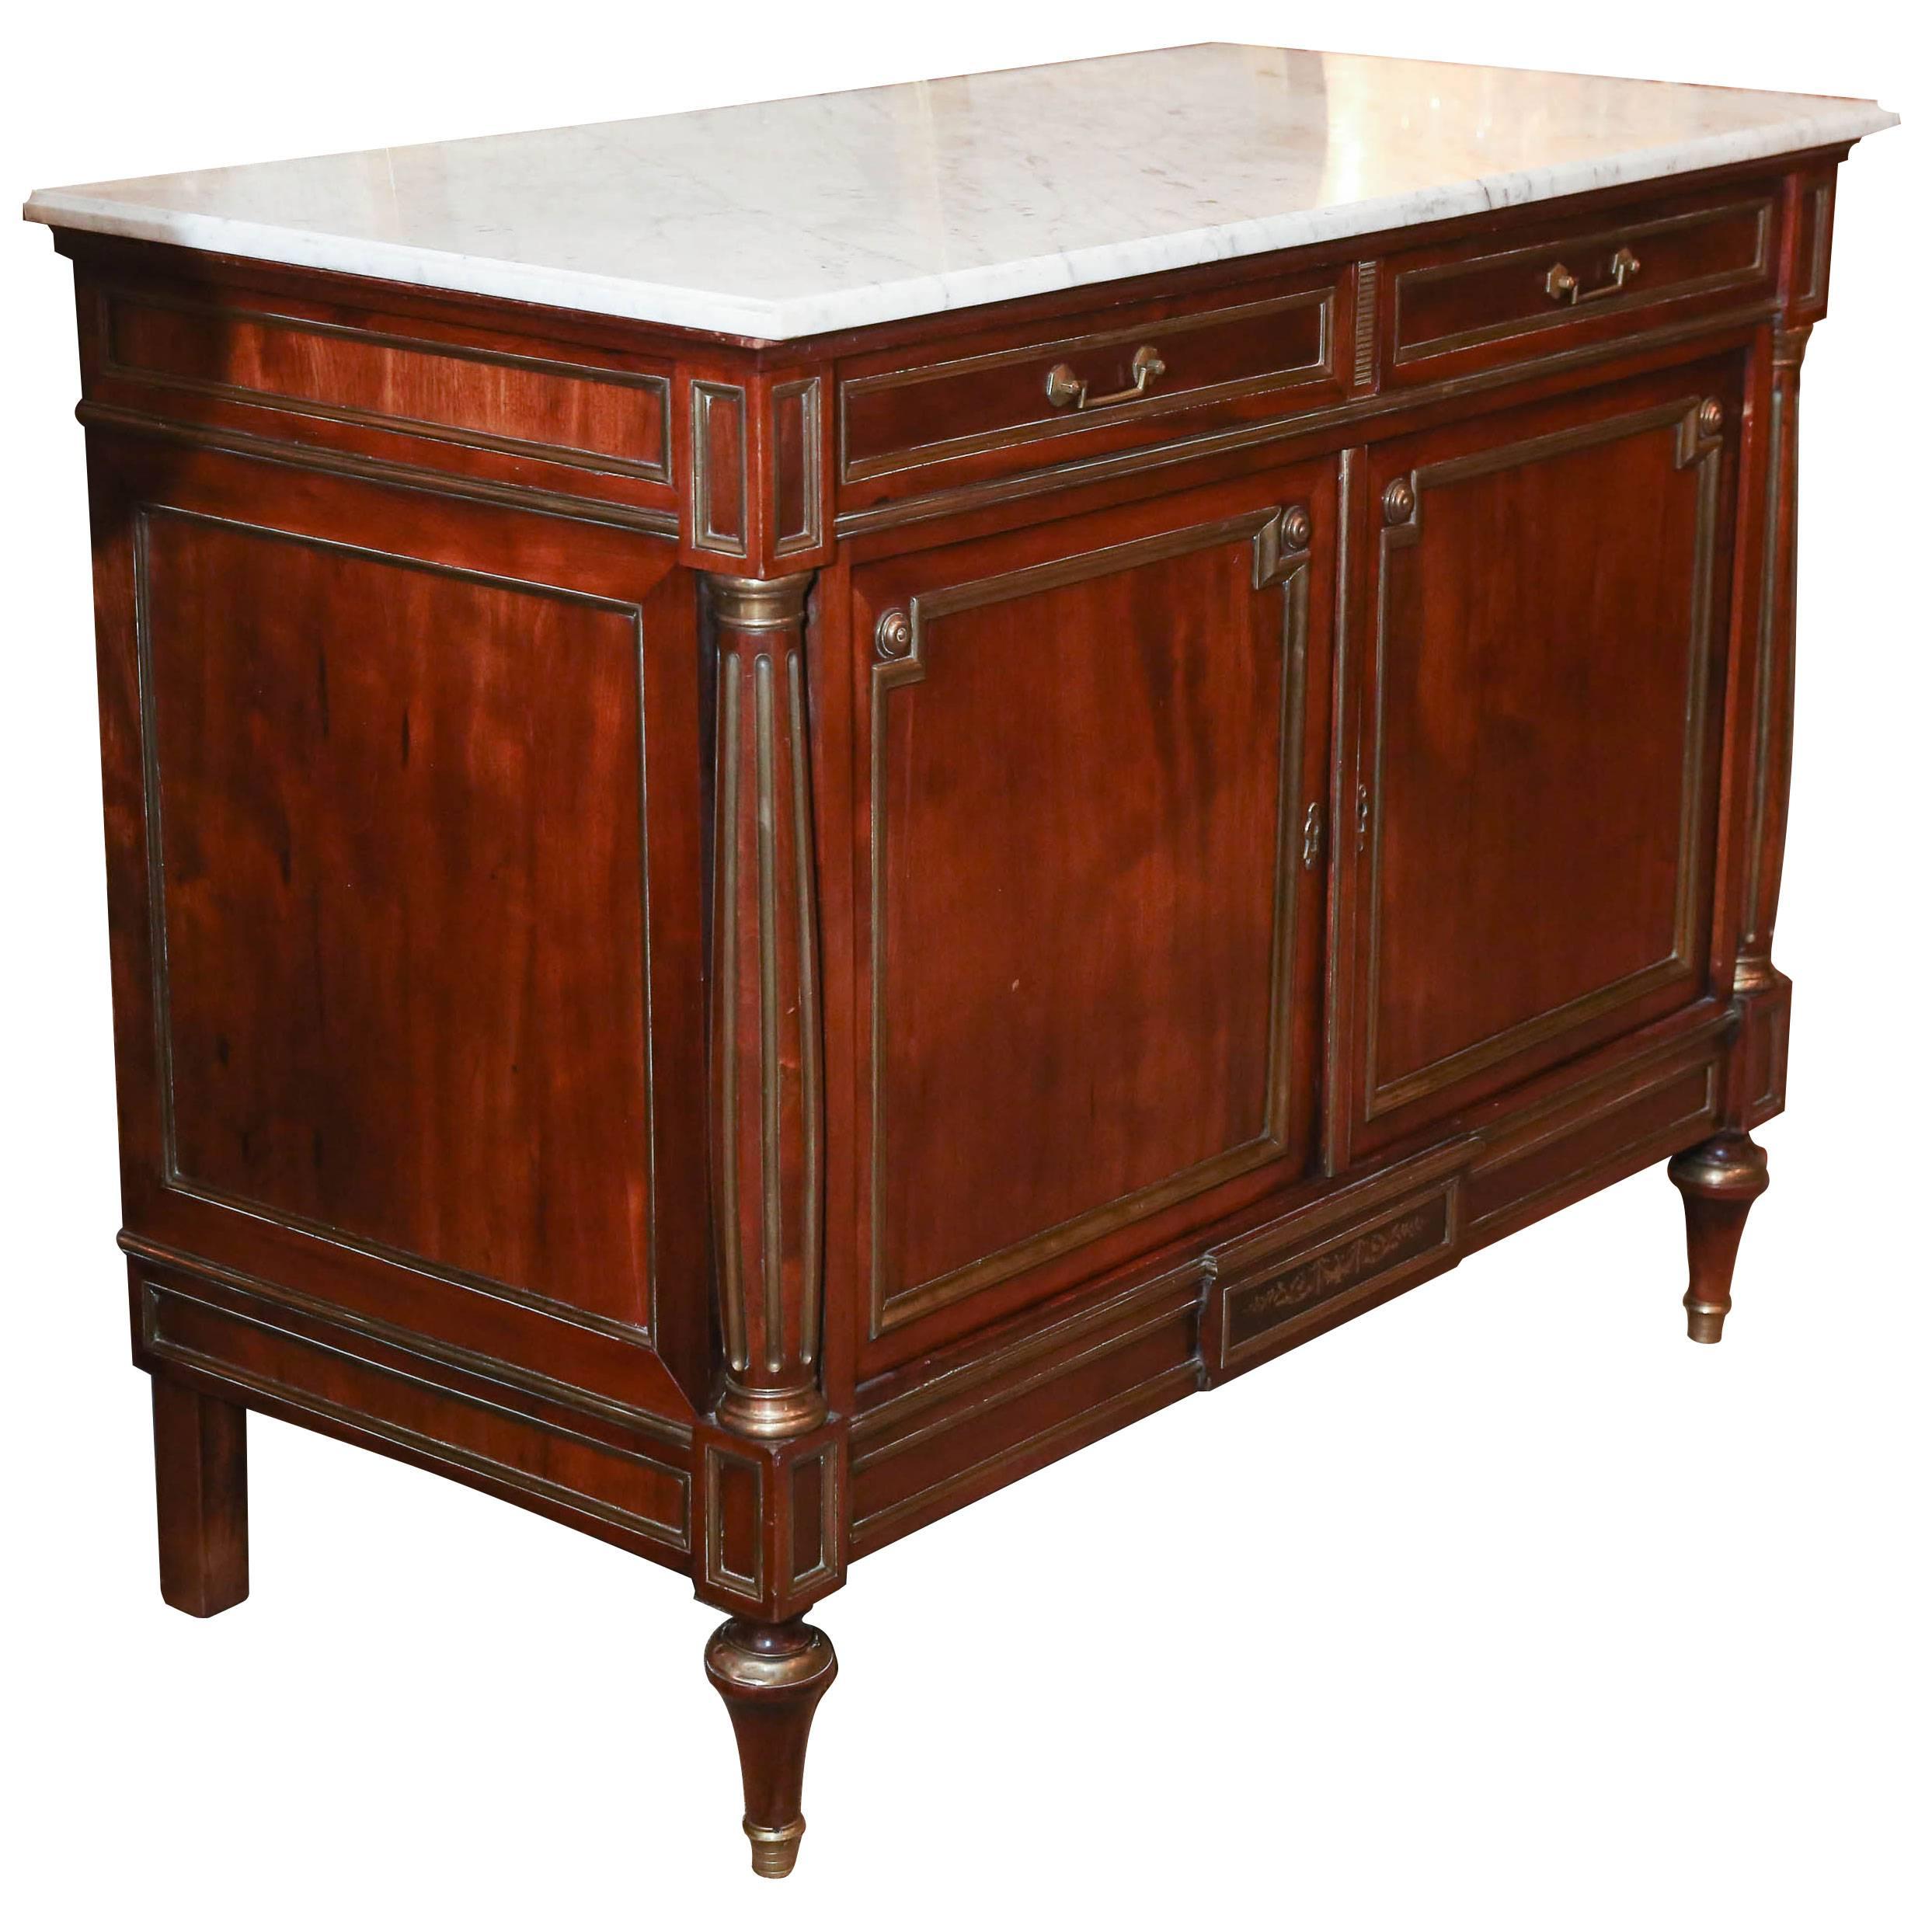 Louis XVI-Style Mahogany and Marble-Top Cabinet